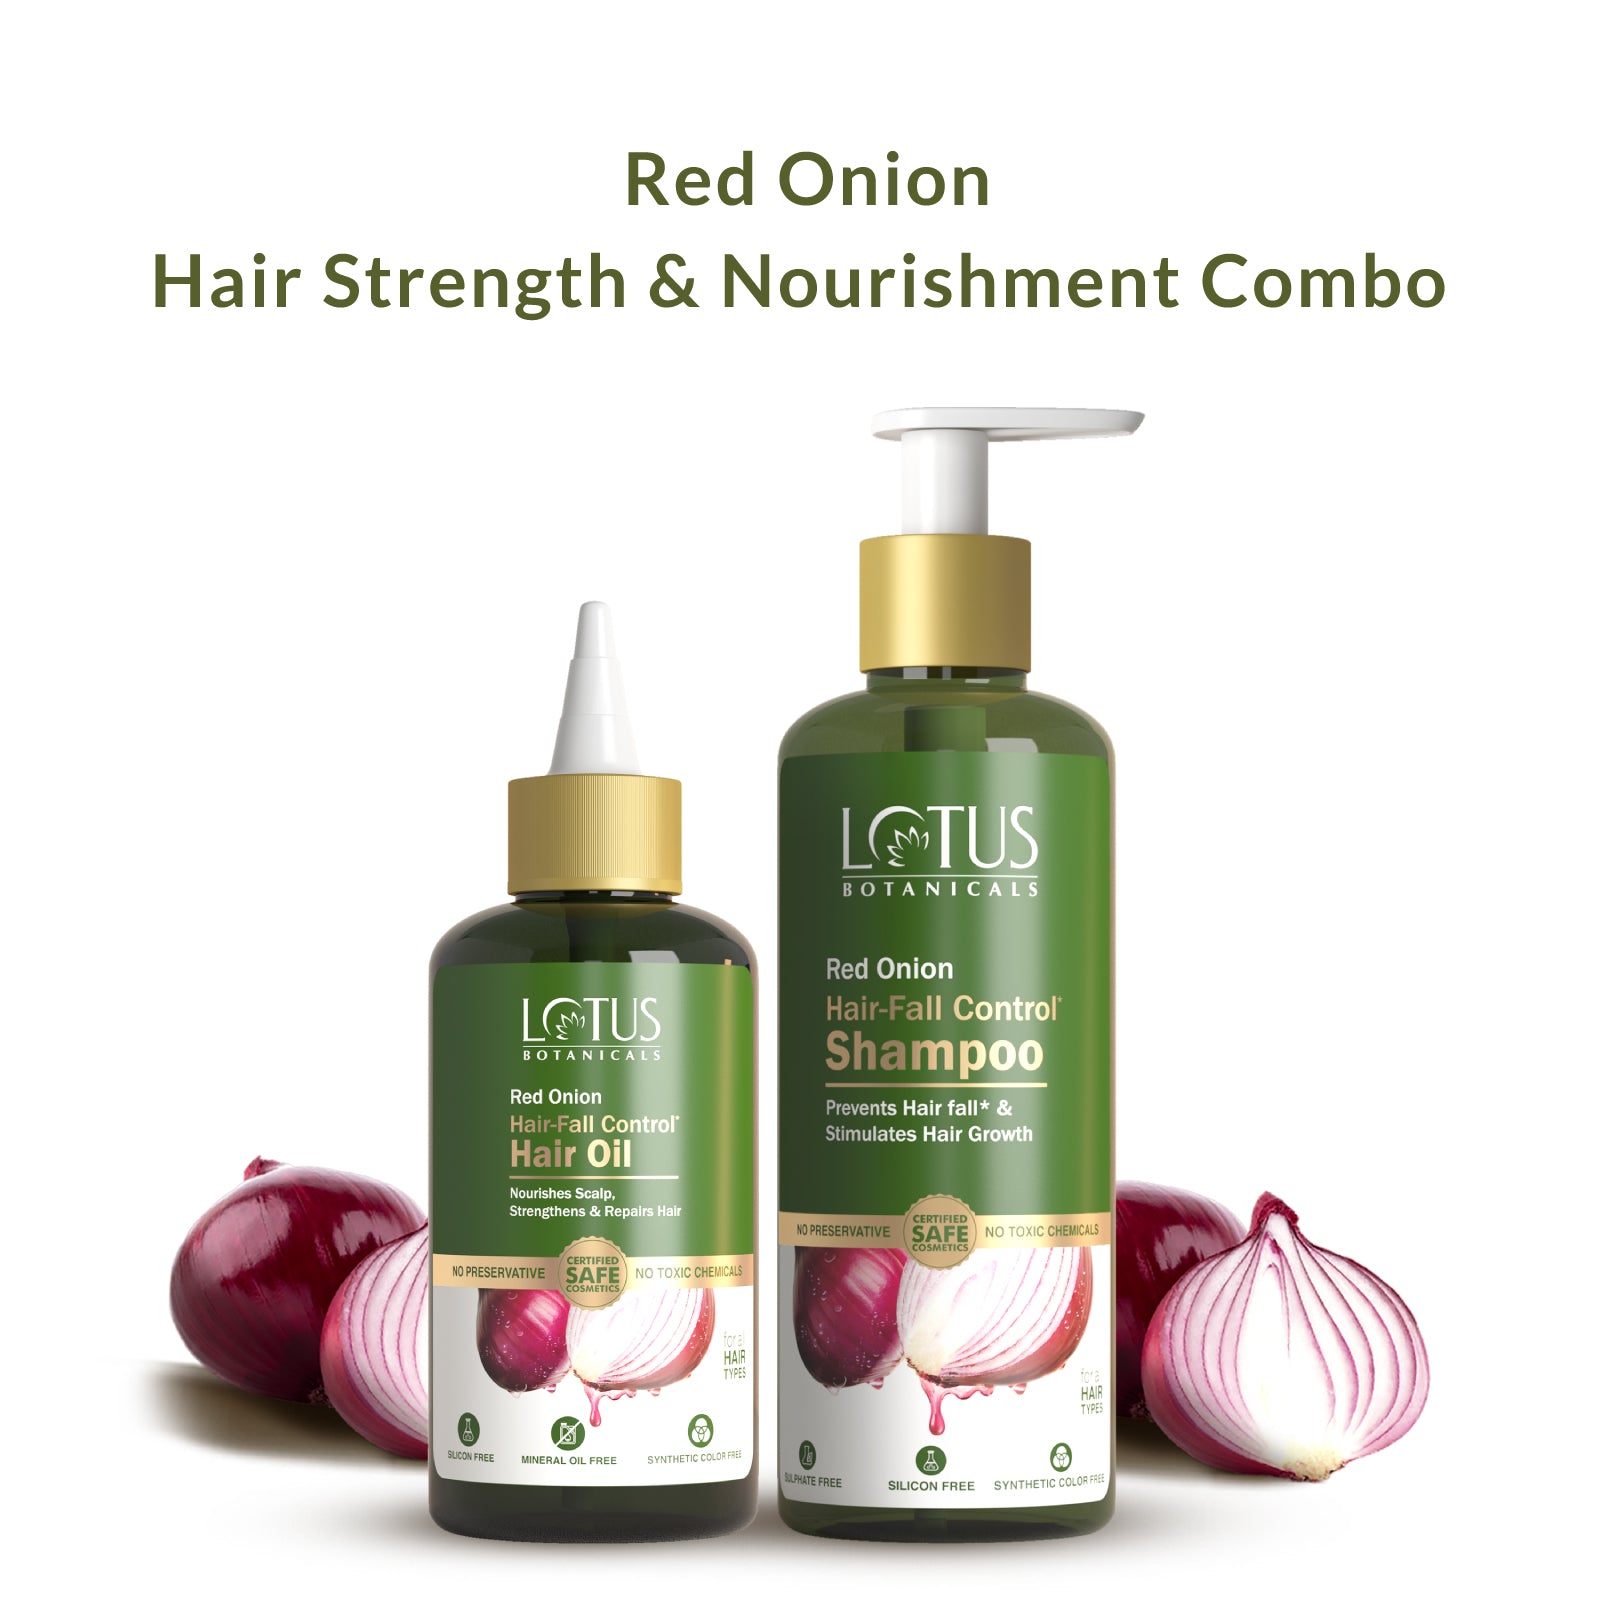 Red Onion Hair Strength & Nourishment Combo - Natural Hair Care with Onion Extracts for Strong and Healthy Hair